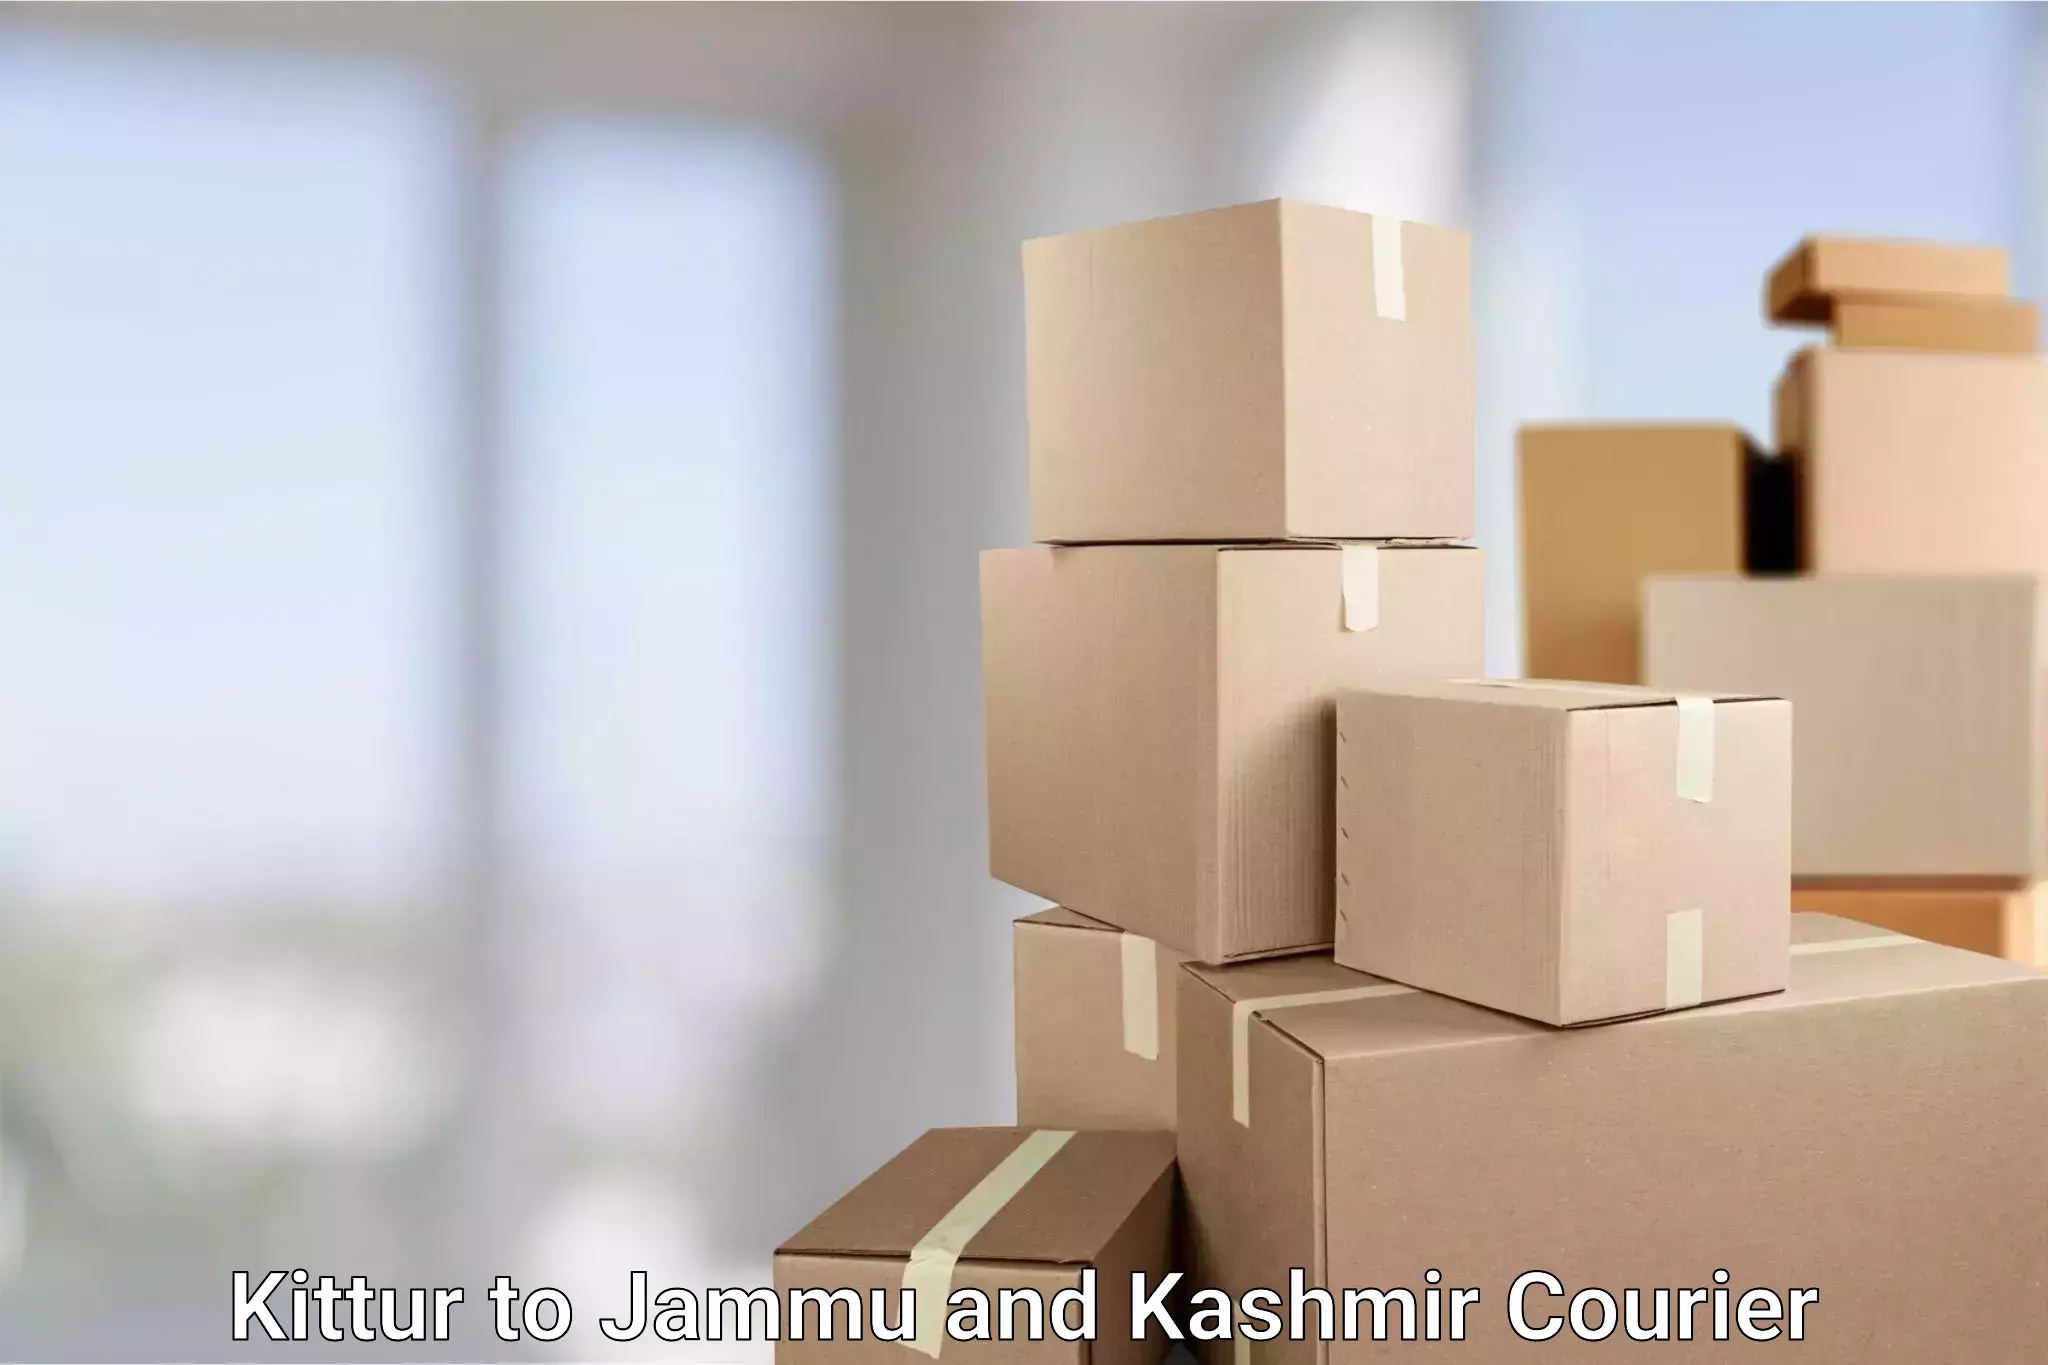 Express package services Kittur to Shopian